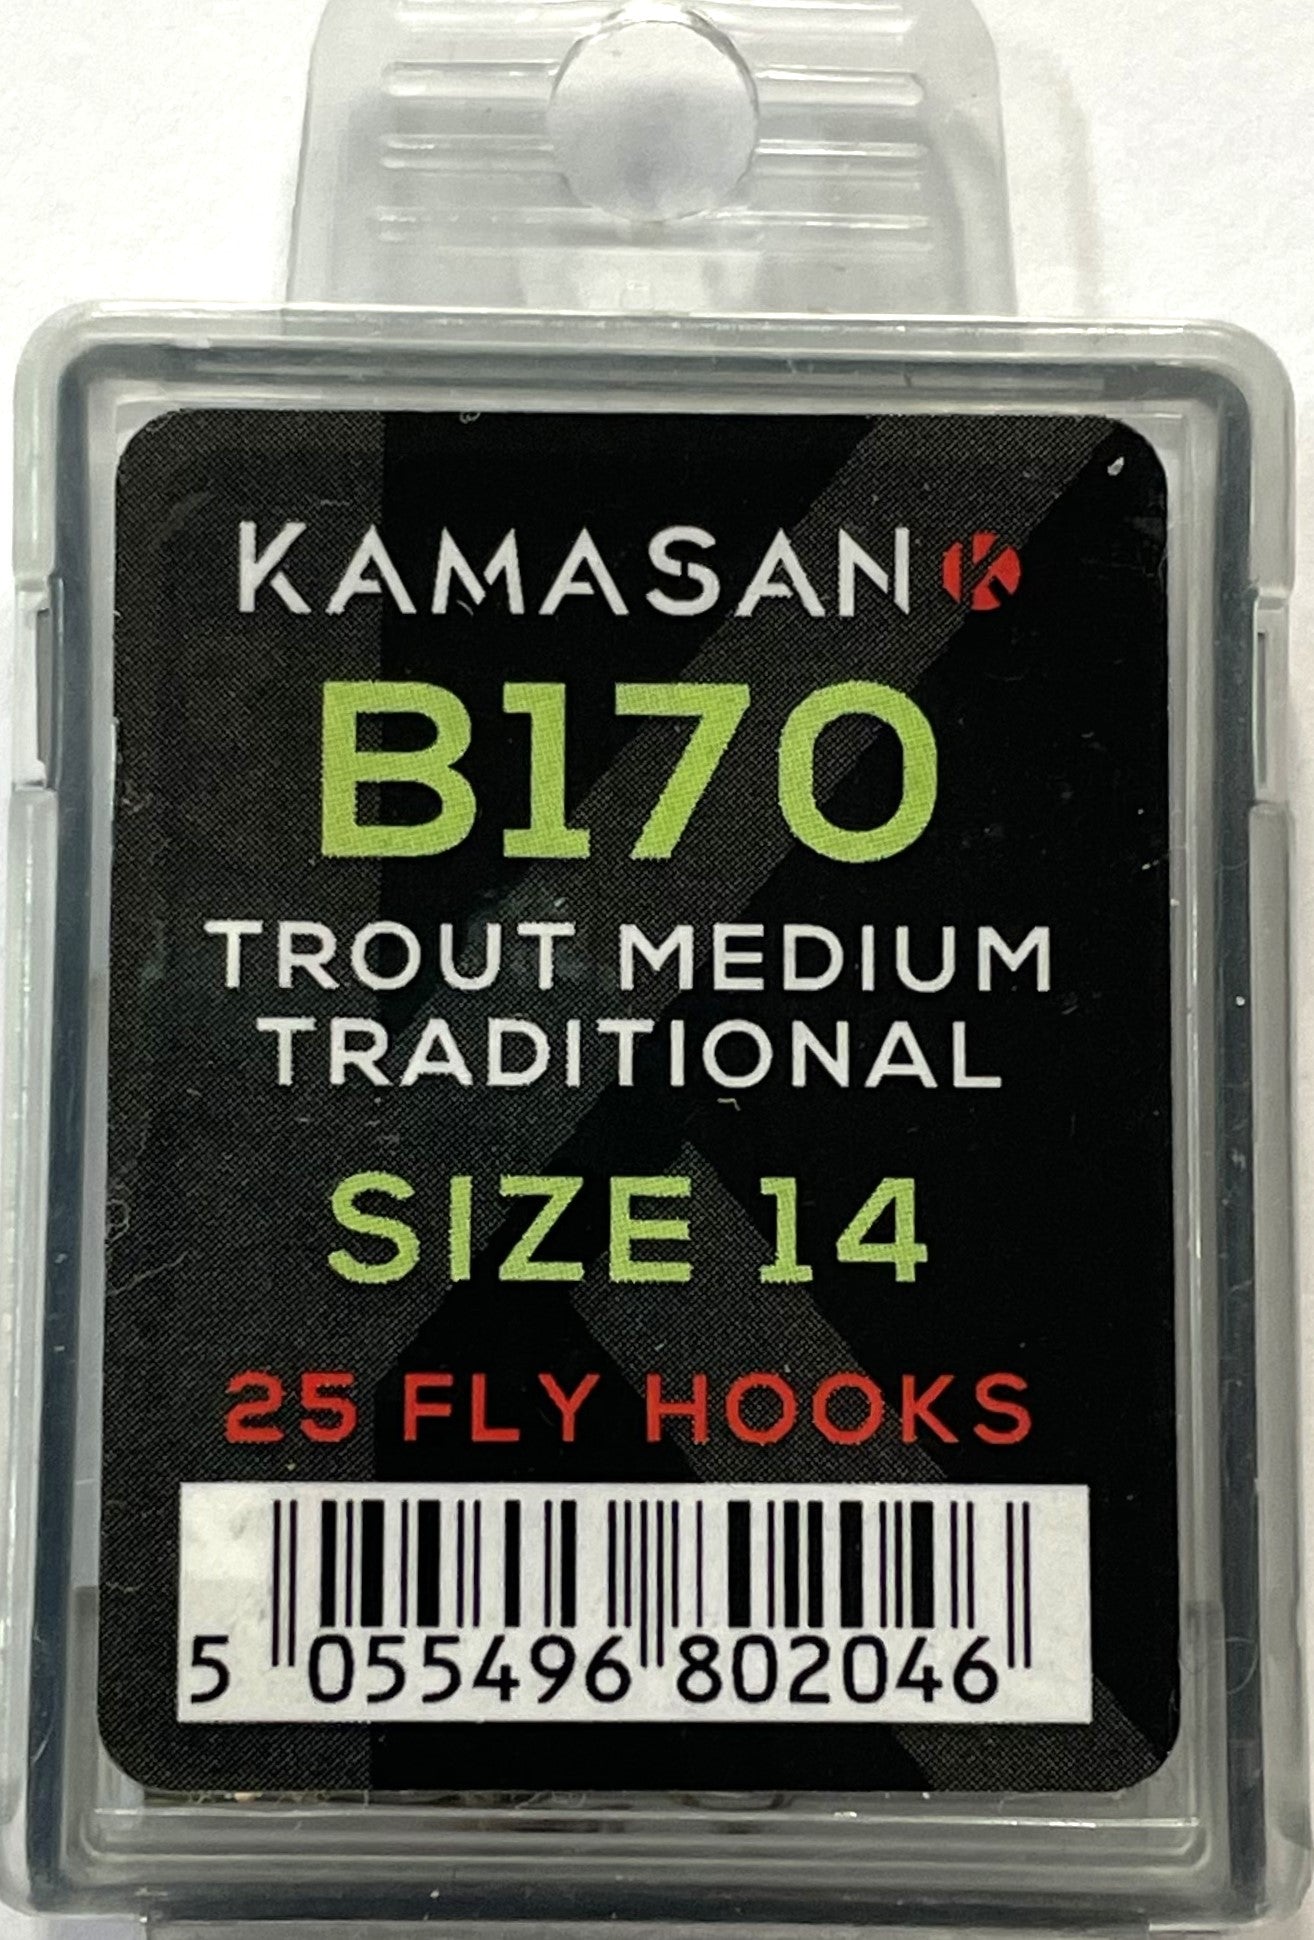 Kamasan B170 Trout Medium Traditional Fly Hooks (Size 14) – Trophy Trout  Lures and Fly Fishing